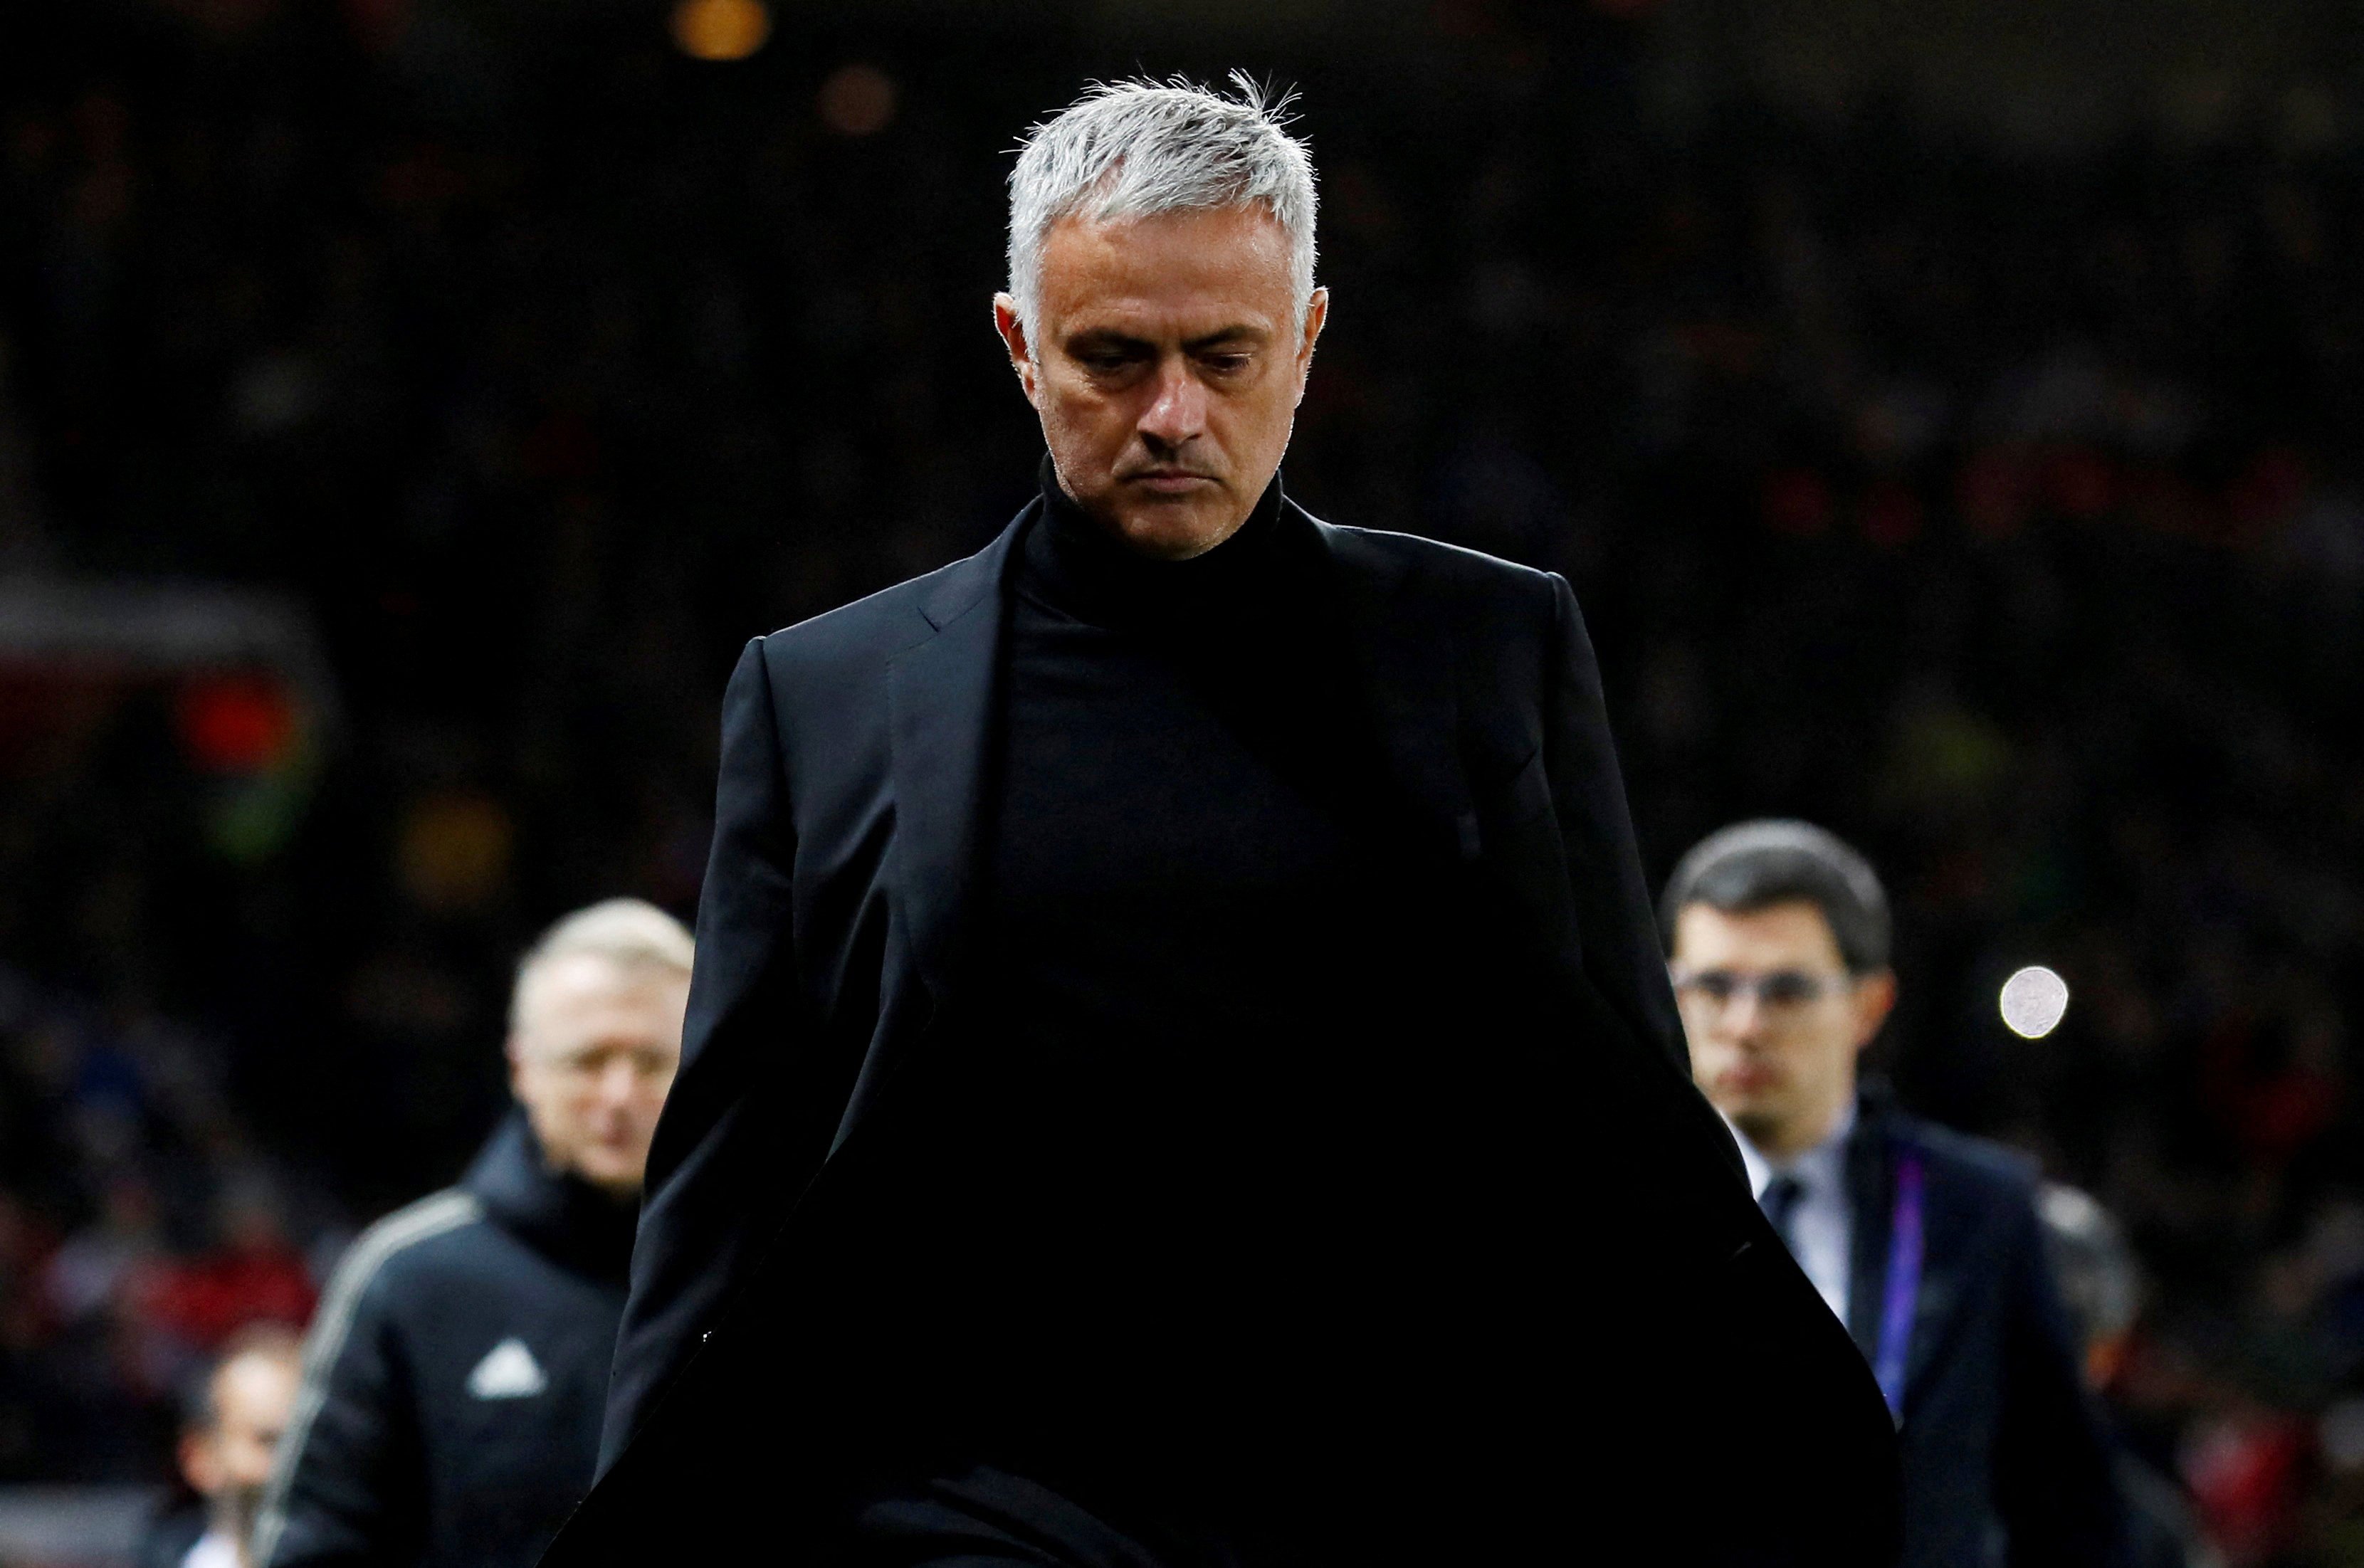 Jose Mourinho’s Inter suffered death by a thousand cuts after he left, but Chelsea unravelled on the Portuguese’s watch. Photo: Reuters